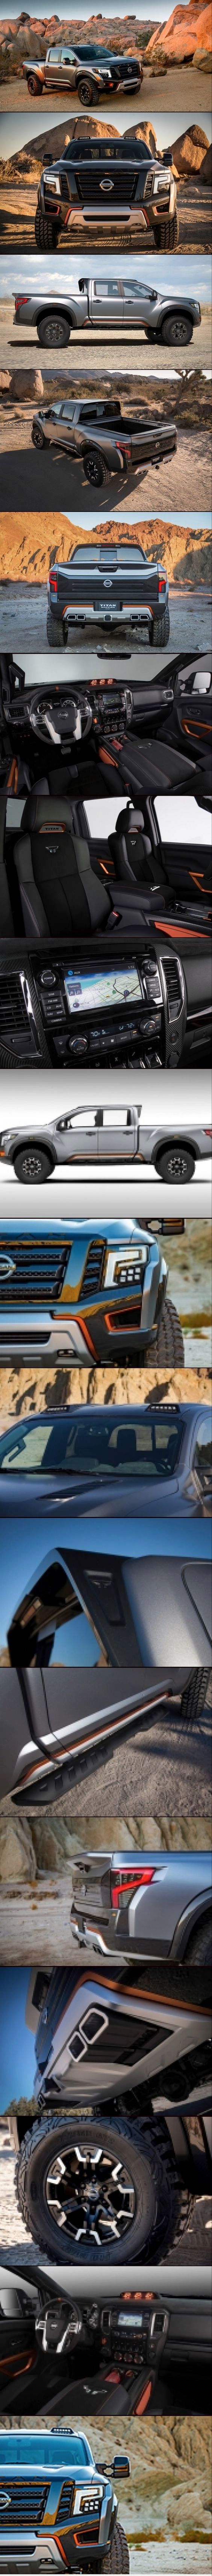 ALL NEW “ 2017 Nissan Titan Warrior Concept ”, 2017 Concept Car Photos and Images, 2017 Cars